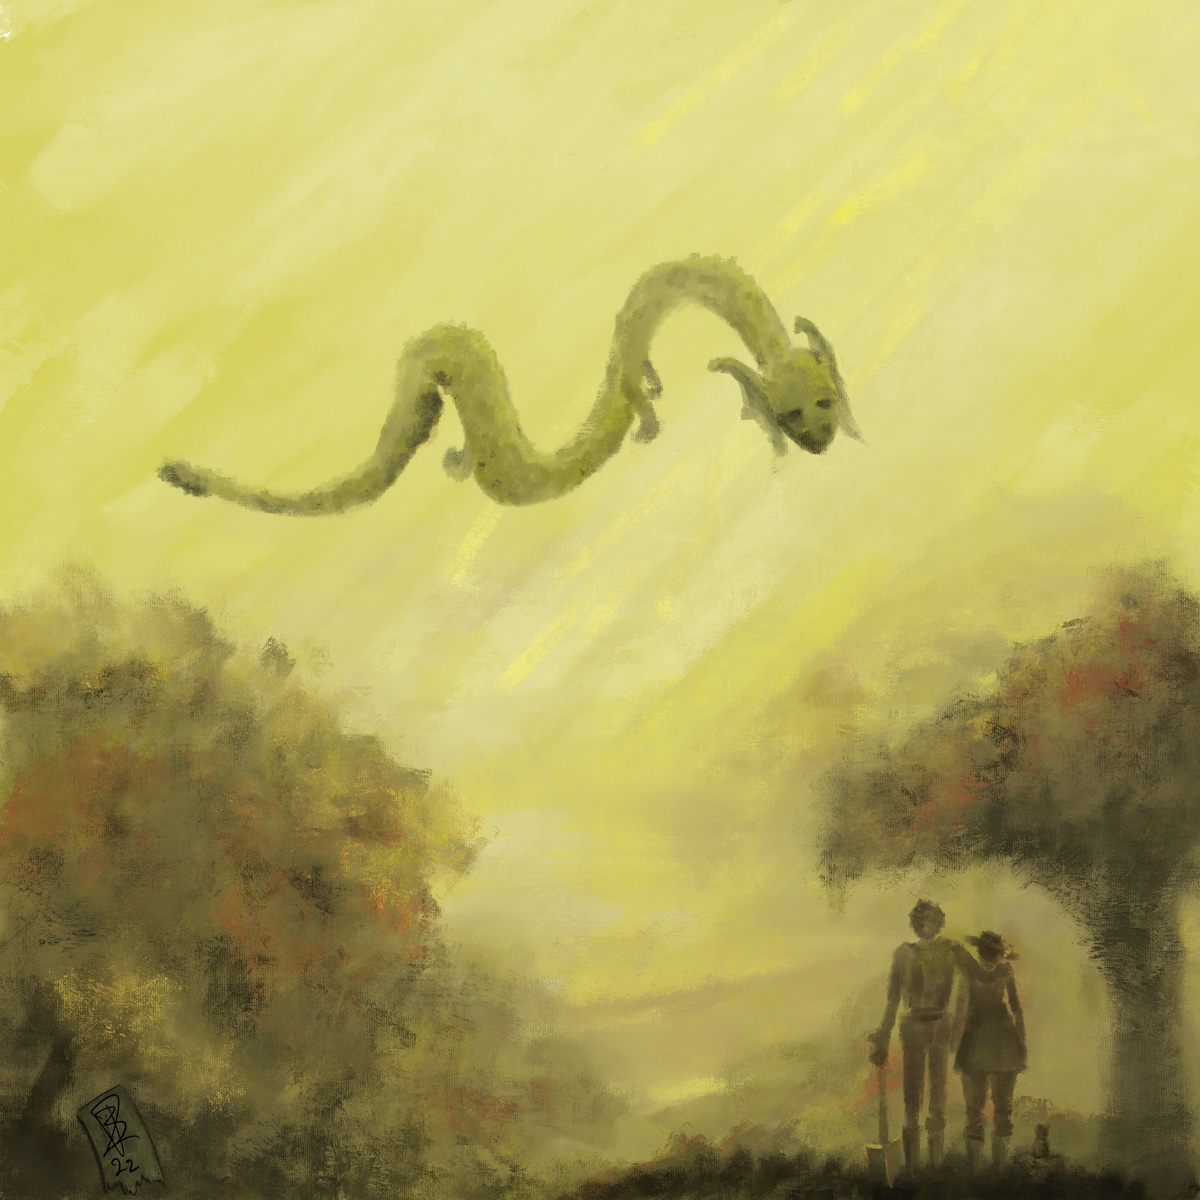 A yellow painting. It looks like a foggy morning. Sunbeams slant down from above. There’s a dragon in the sky above a valley, looking down on two people and a cat in the foreground, who have their backs turned to us and are looking up at the dragon.